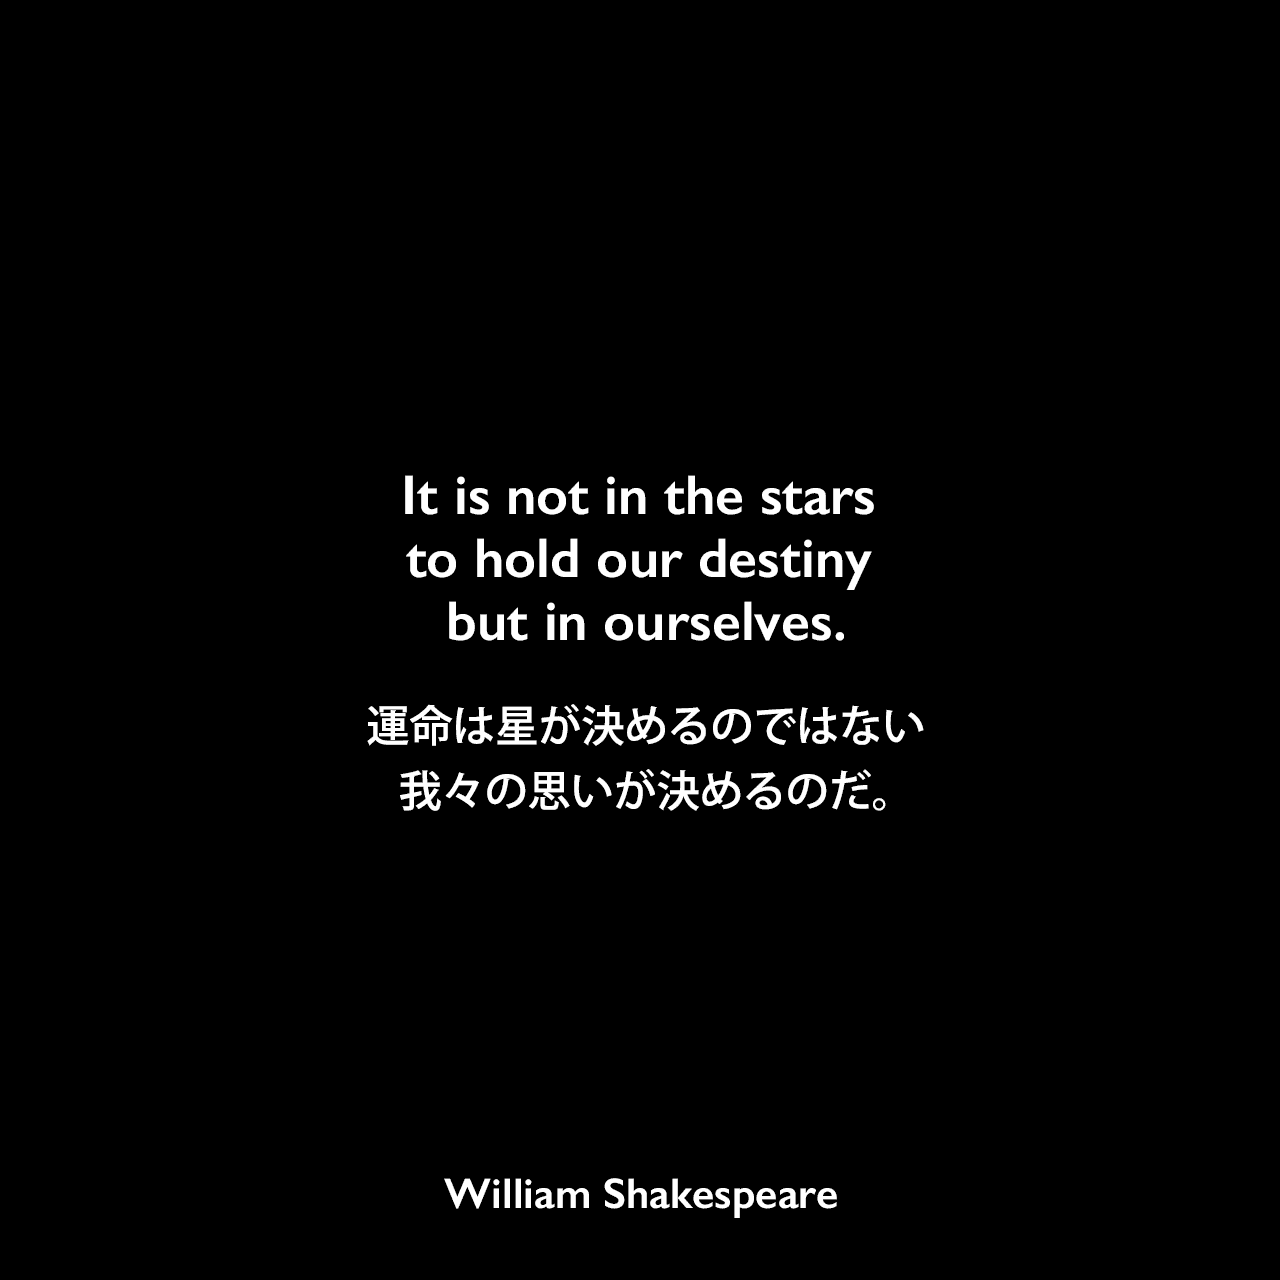 It is not in the stars to hold our destiny but in ourselves.運命は星が決めるのではない，我々の思いが決めるのだ。William Shakespeare